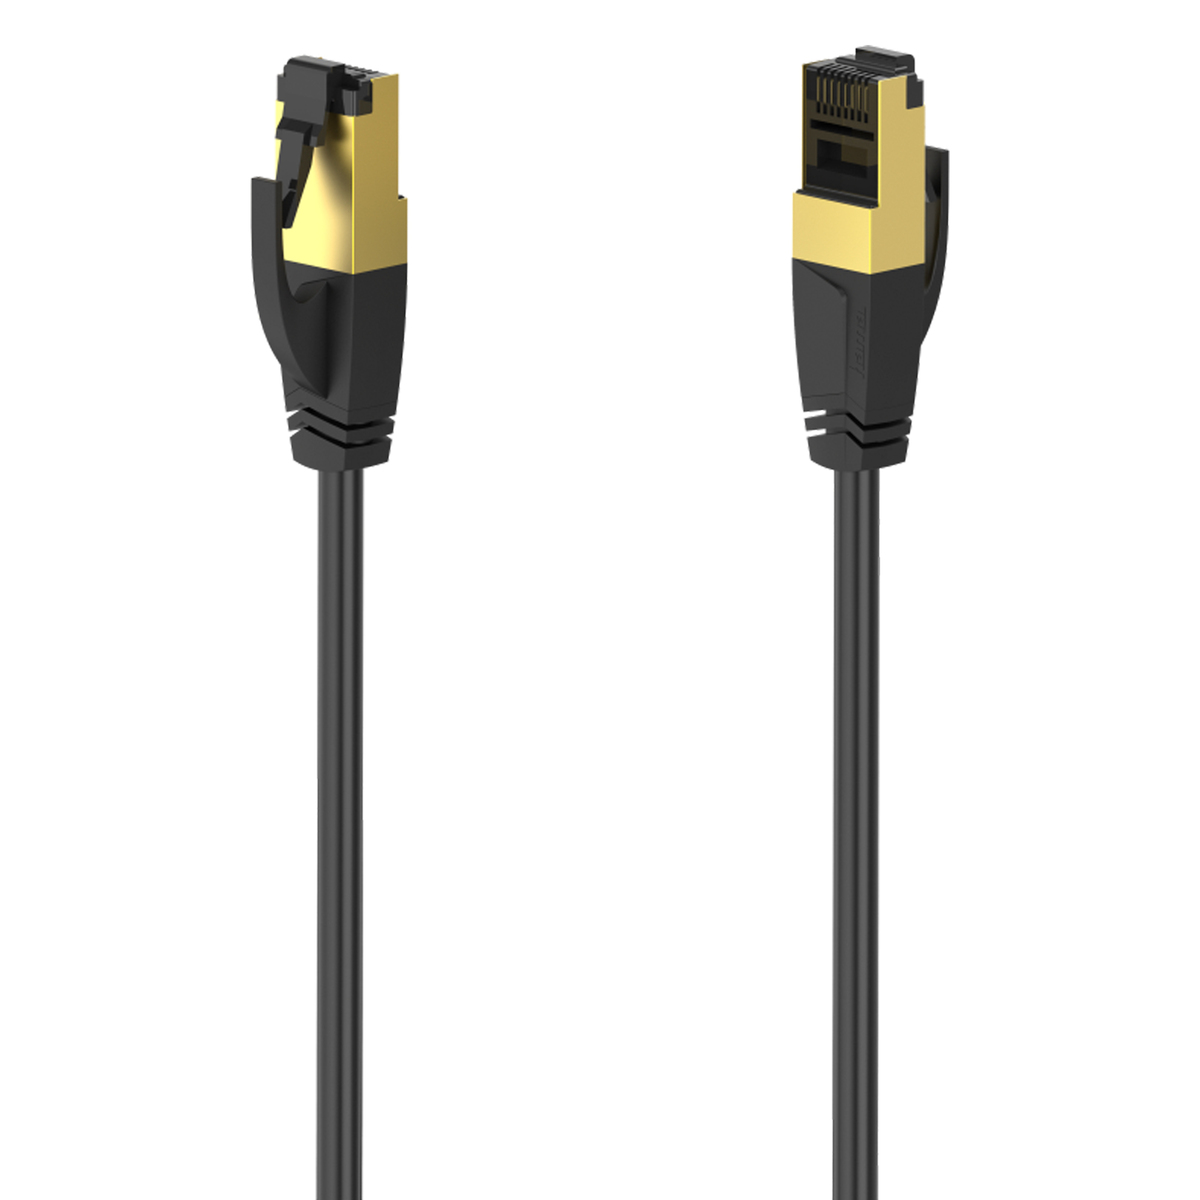 Hama Network Cable, CAT-8, 40 Gbit/s, S/FTP Shielded, Halogen-free, 3 m, 200693